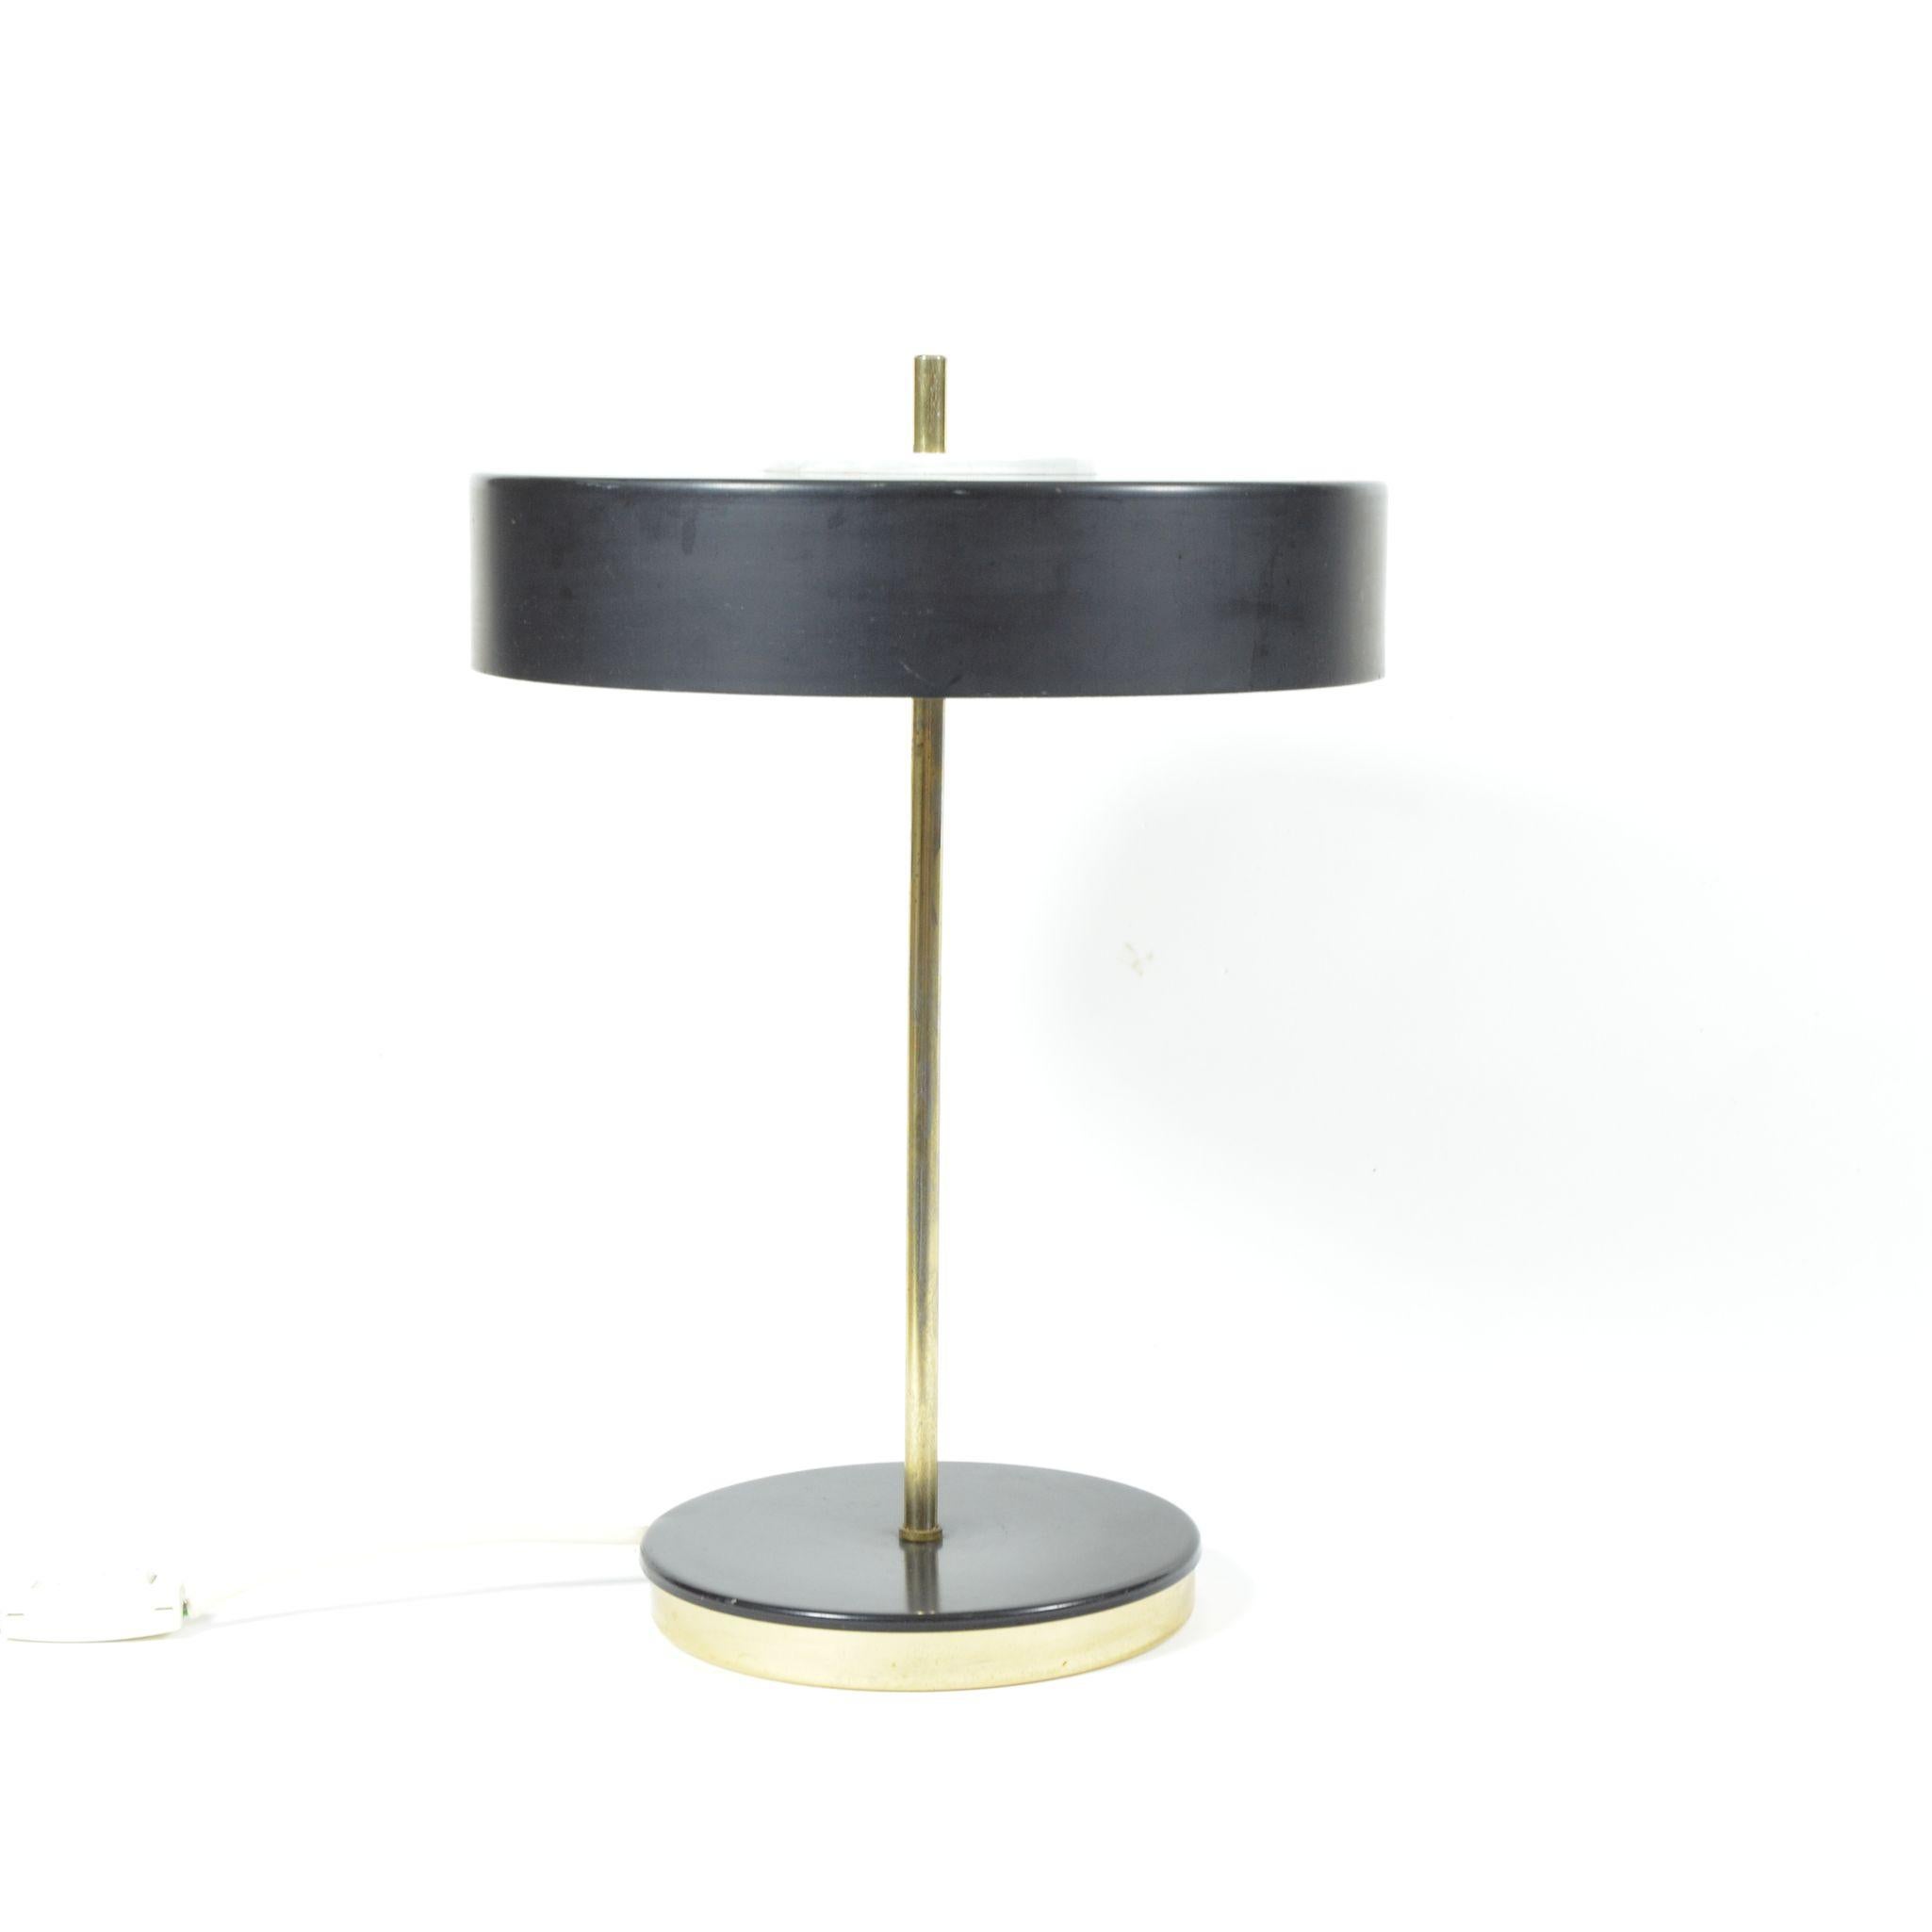 Fully working table lamp in black metal and with brass details. Equipped with two bulbs, screw E27. Original, but very good, condition. Manufactured in former Czechoslovakia by Lustry n. p. Kamenický Šenov.